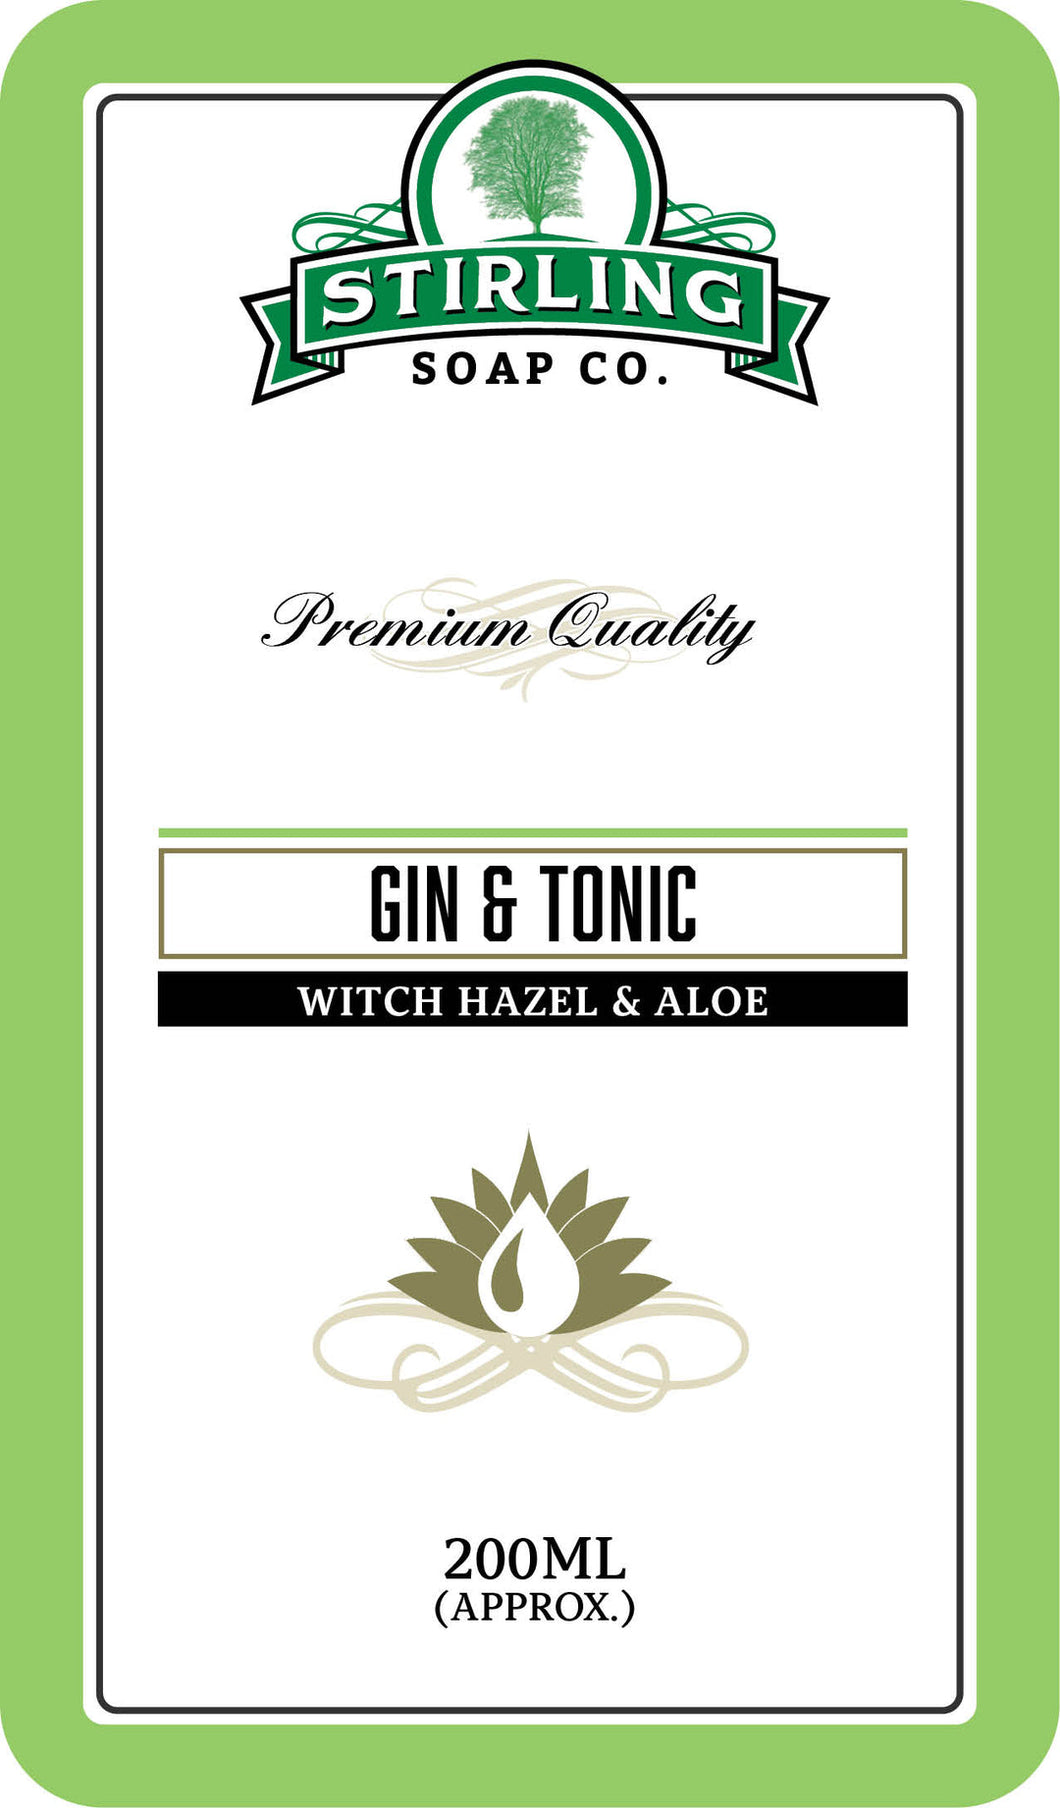 Stirling Soaps- Gin & Tonic Witch Hazel and Aloe